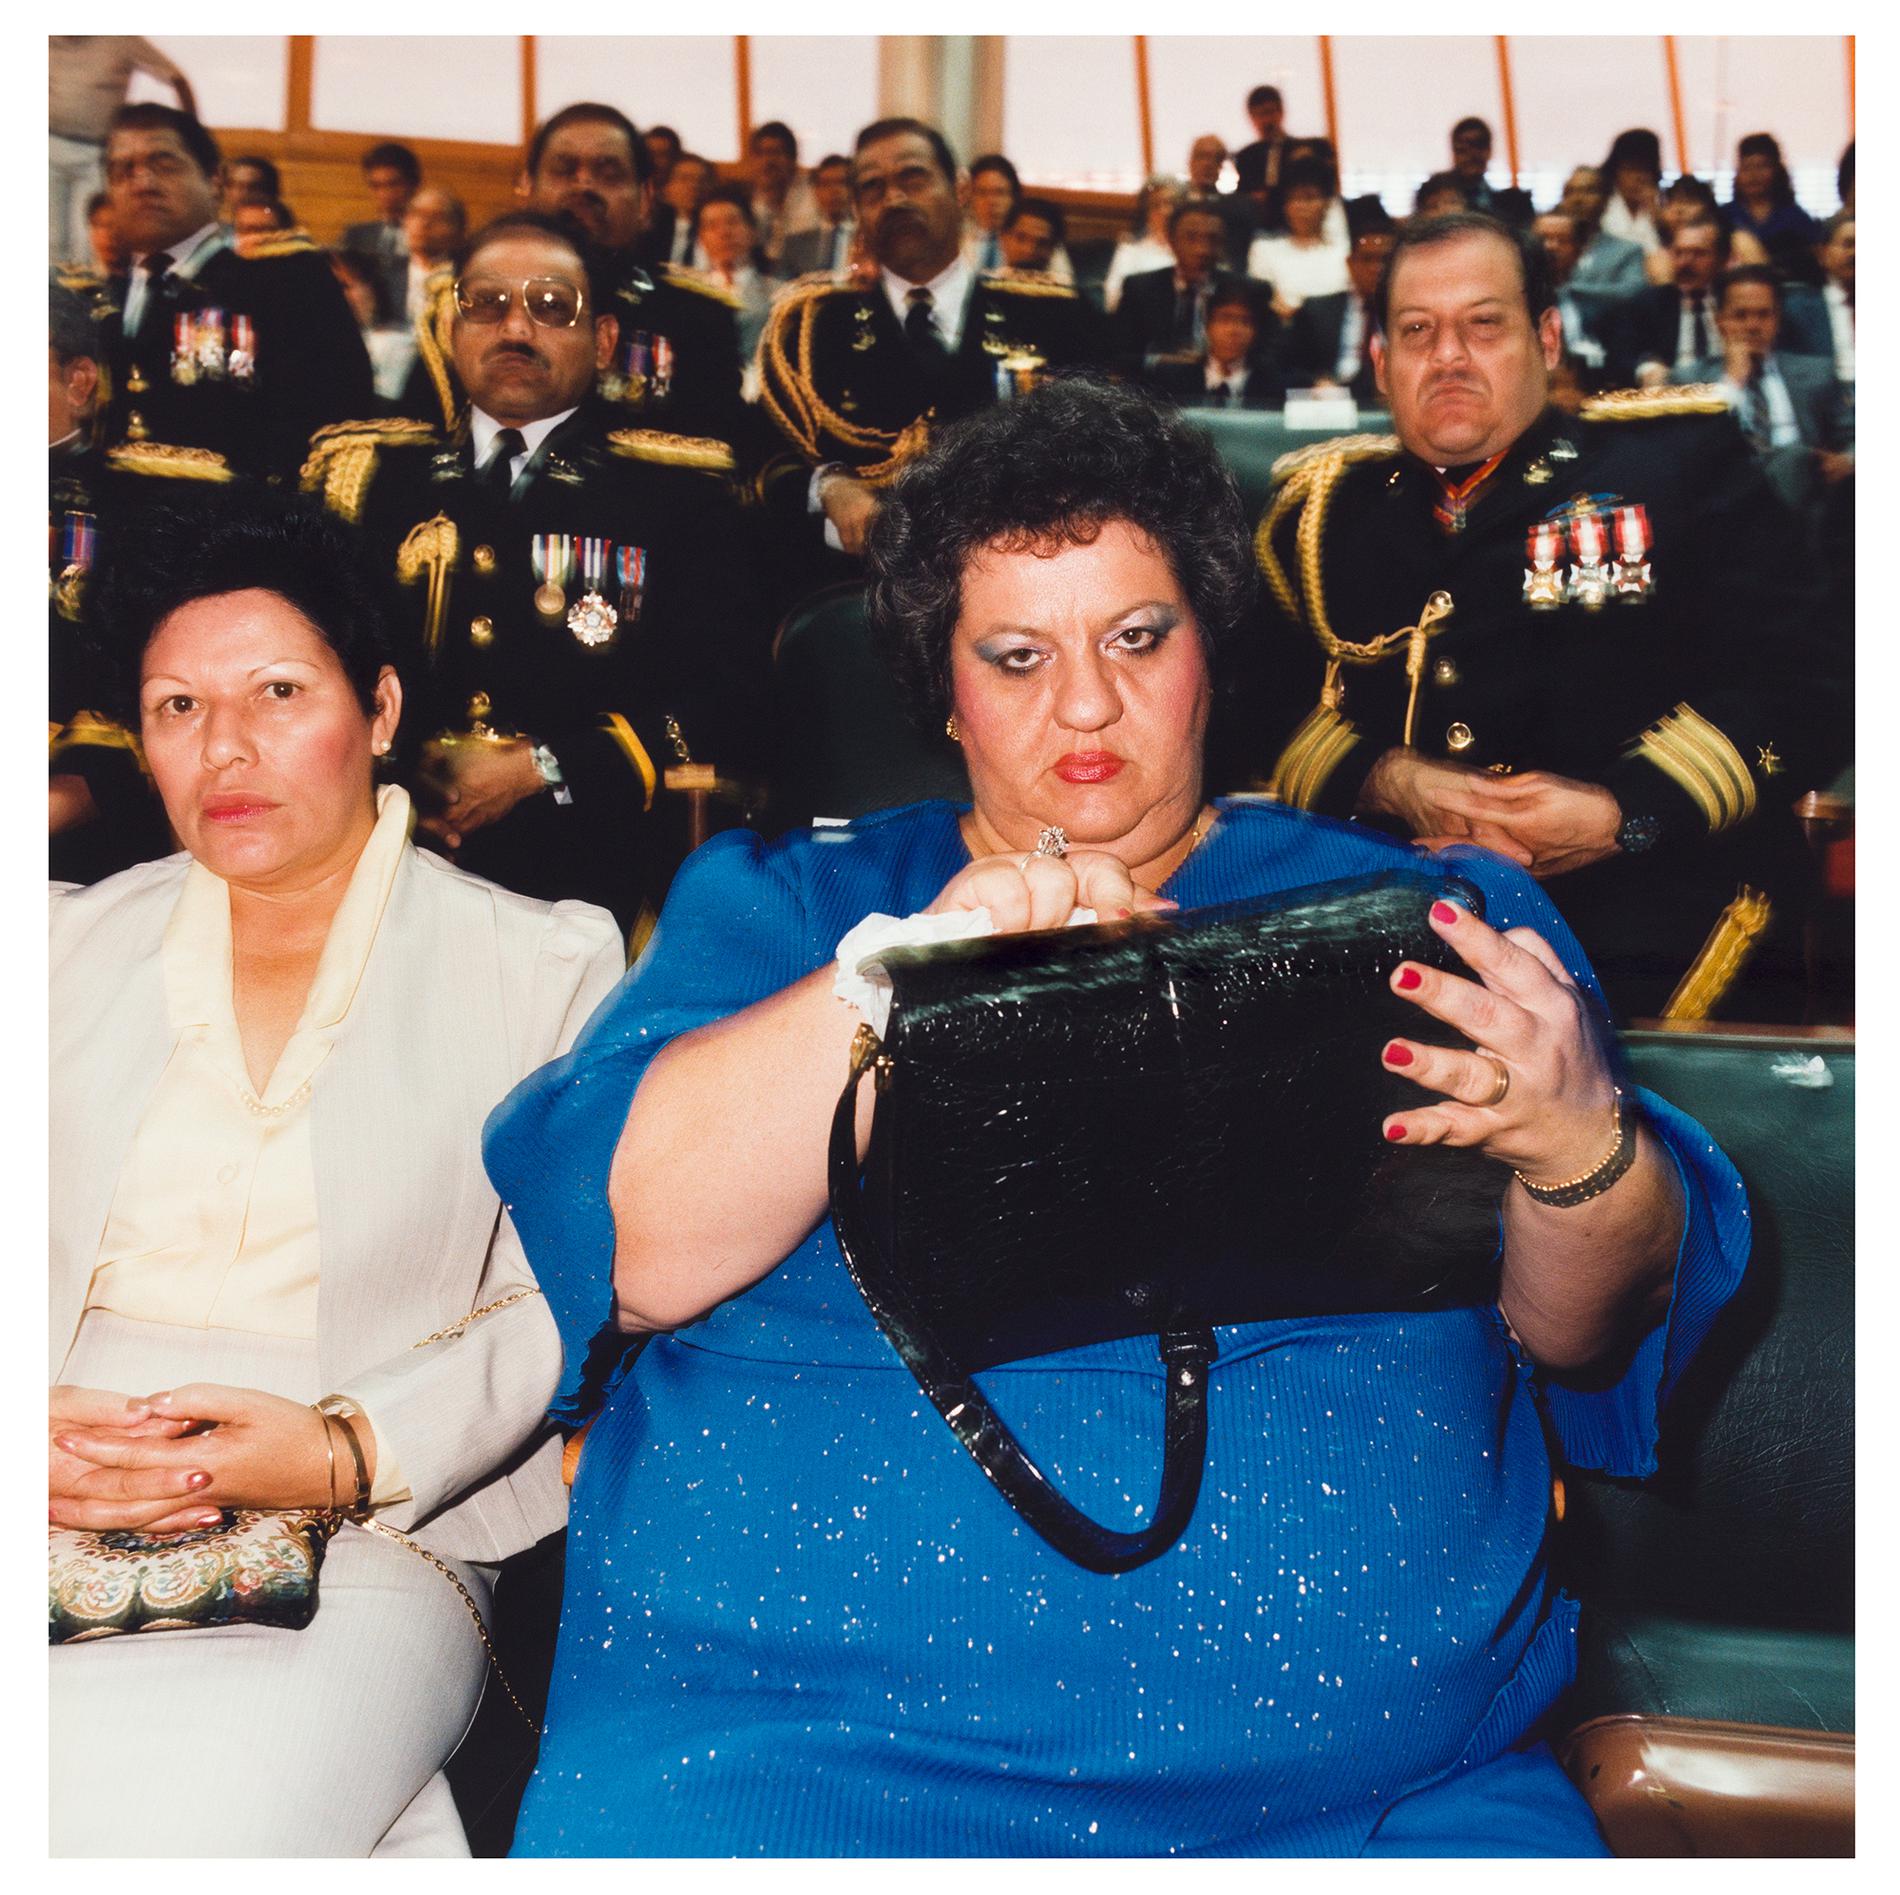 Seated in an auditorium, a woman in a blue dress looks directly at the camera; behind her sit military personnel